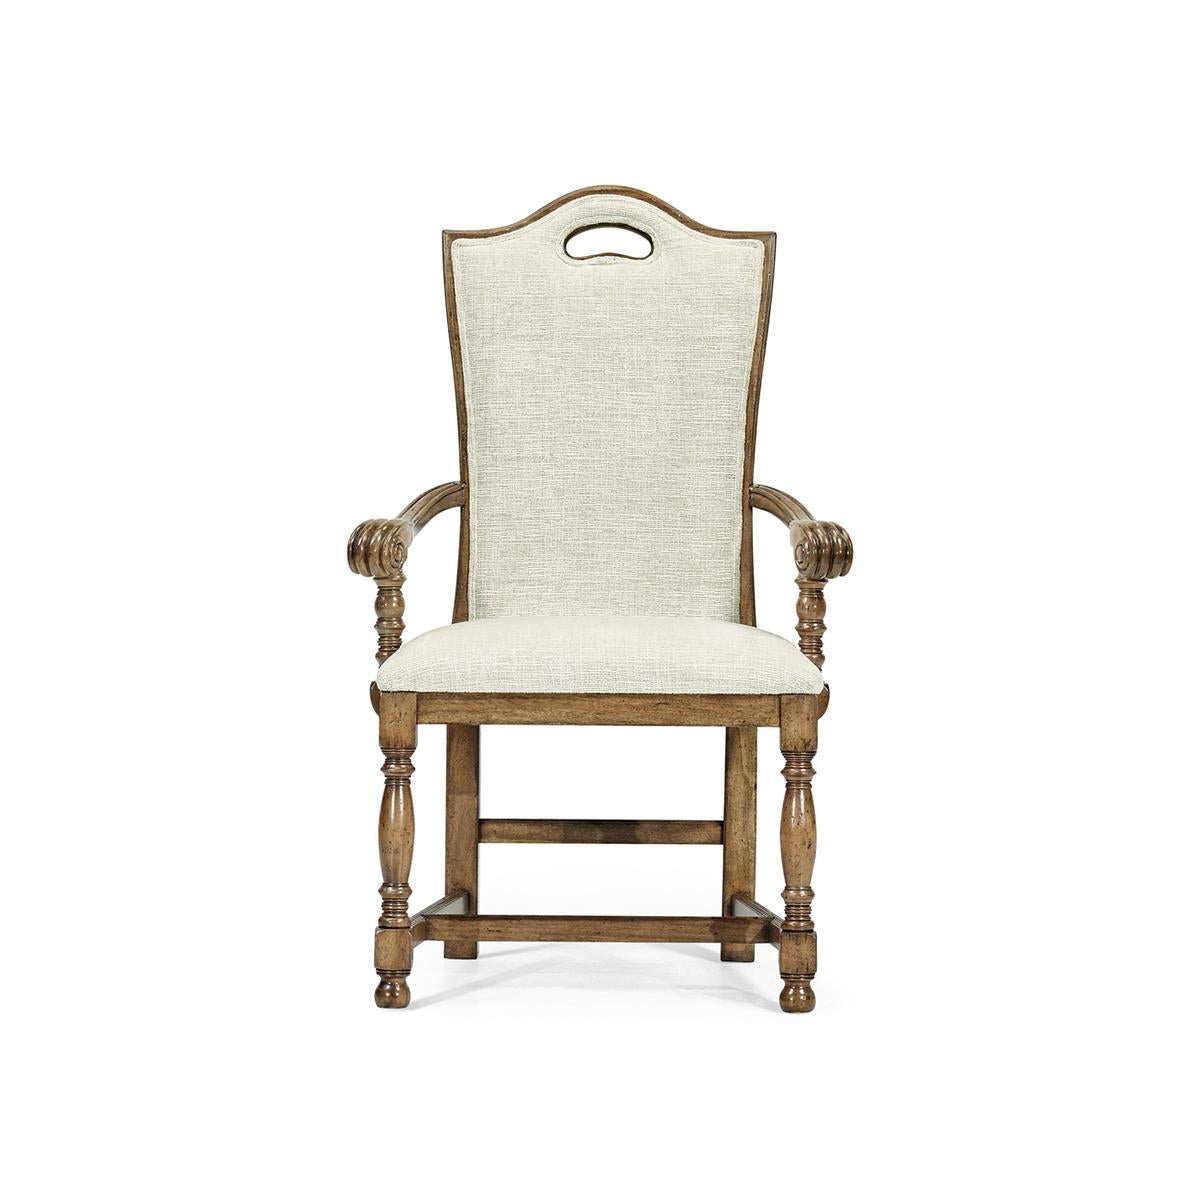 The William and Mary high back armchair is an elegant and comfortable chair with a medium driftwood finish, high backrest, and plush upholstery. It features a beautifully curved top rail with a pierced handle and sturdy construction with baluster